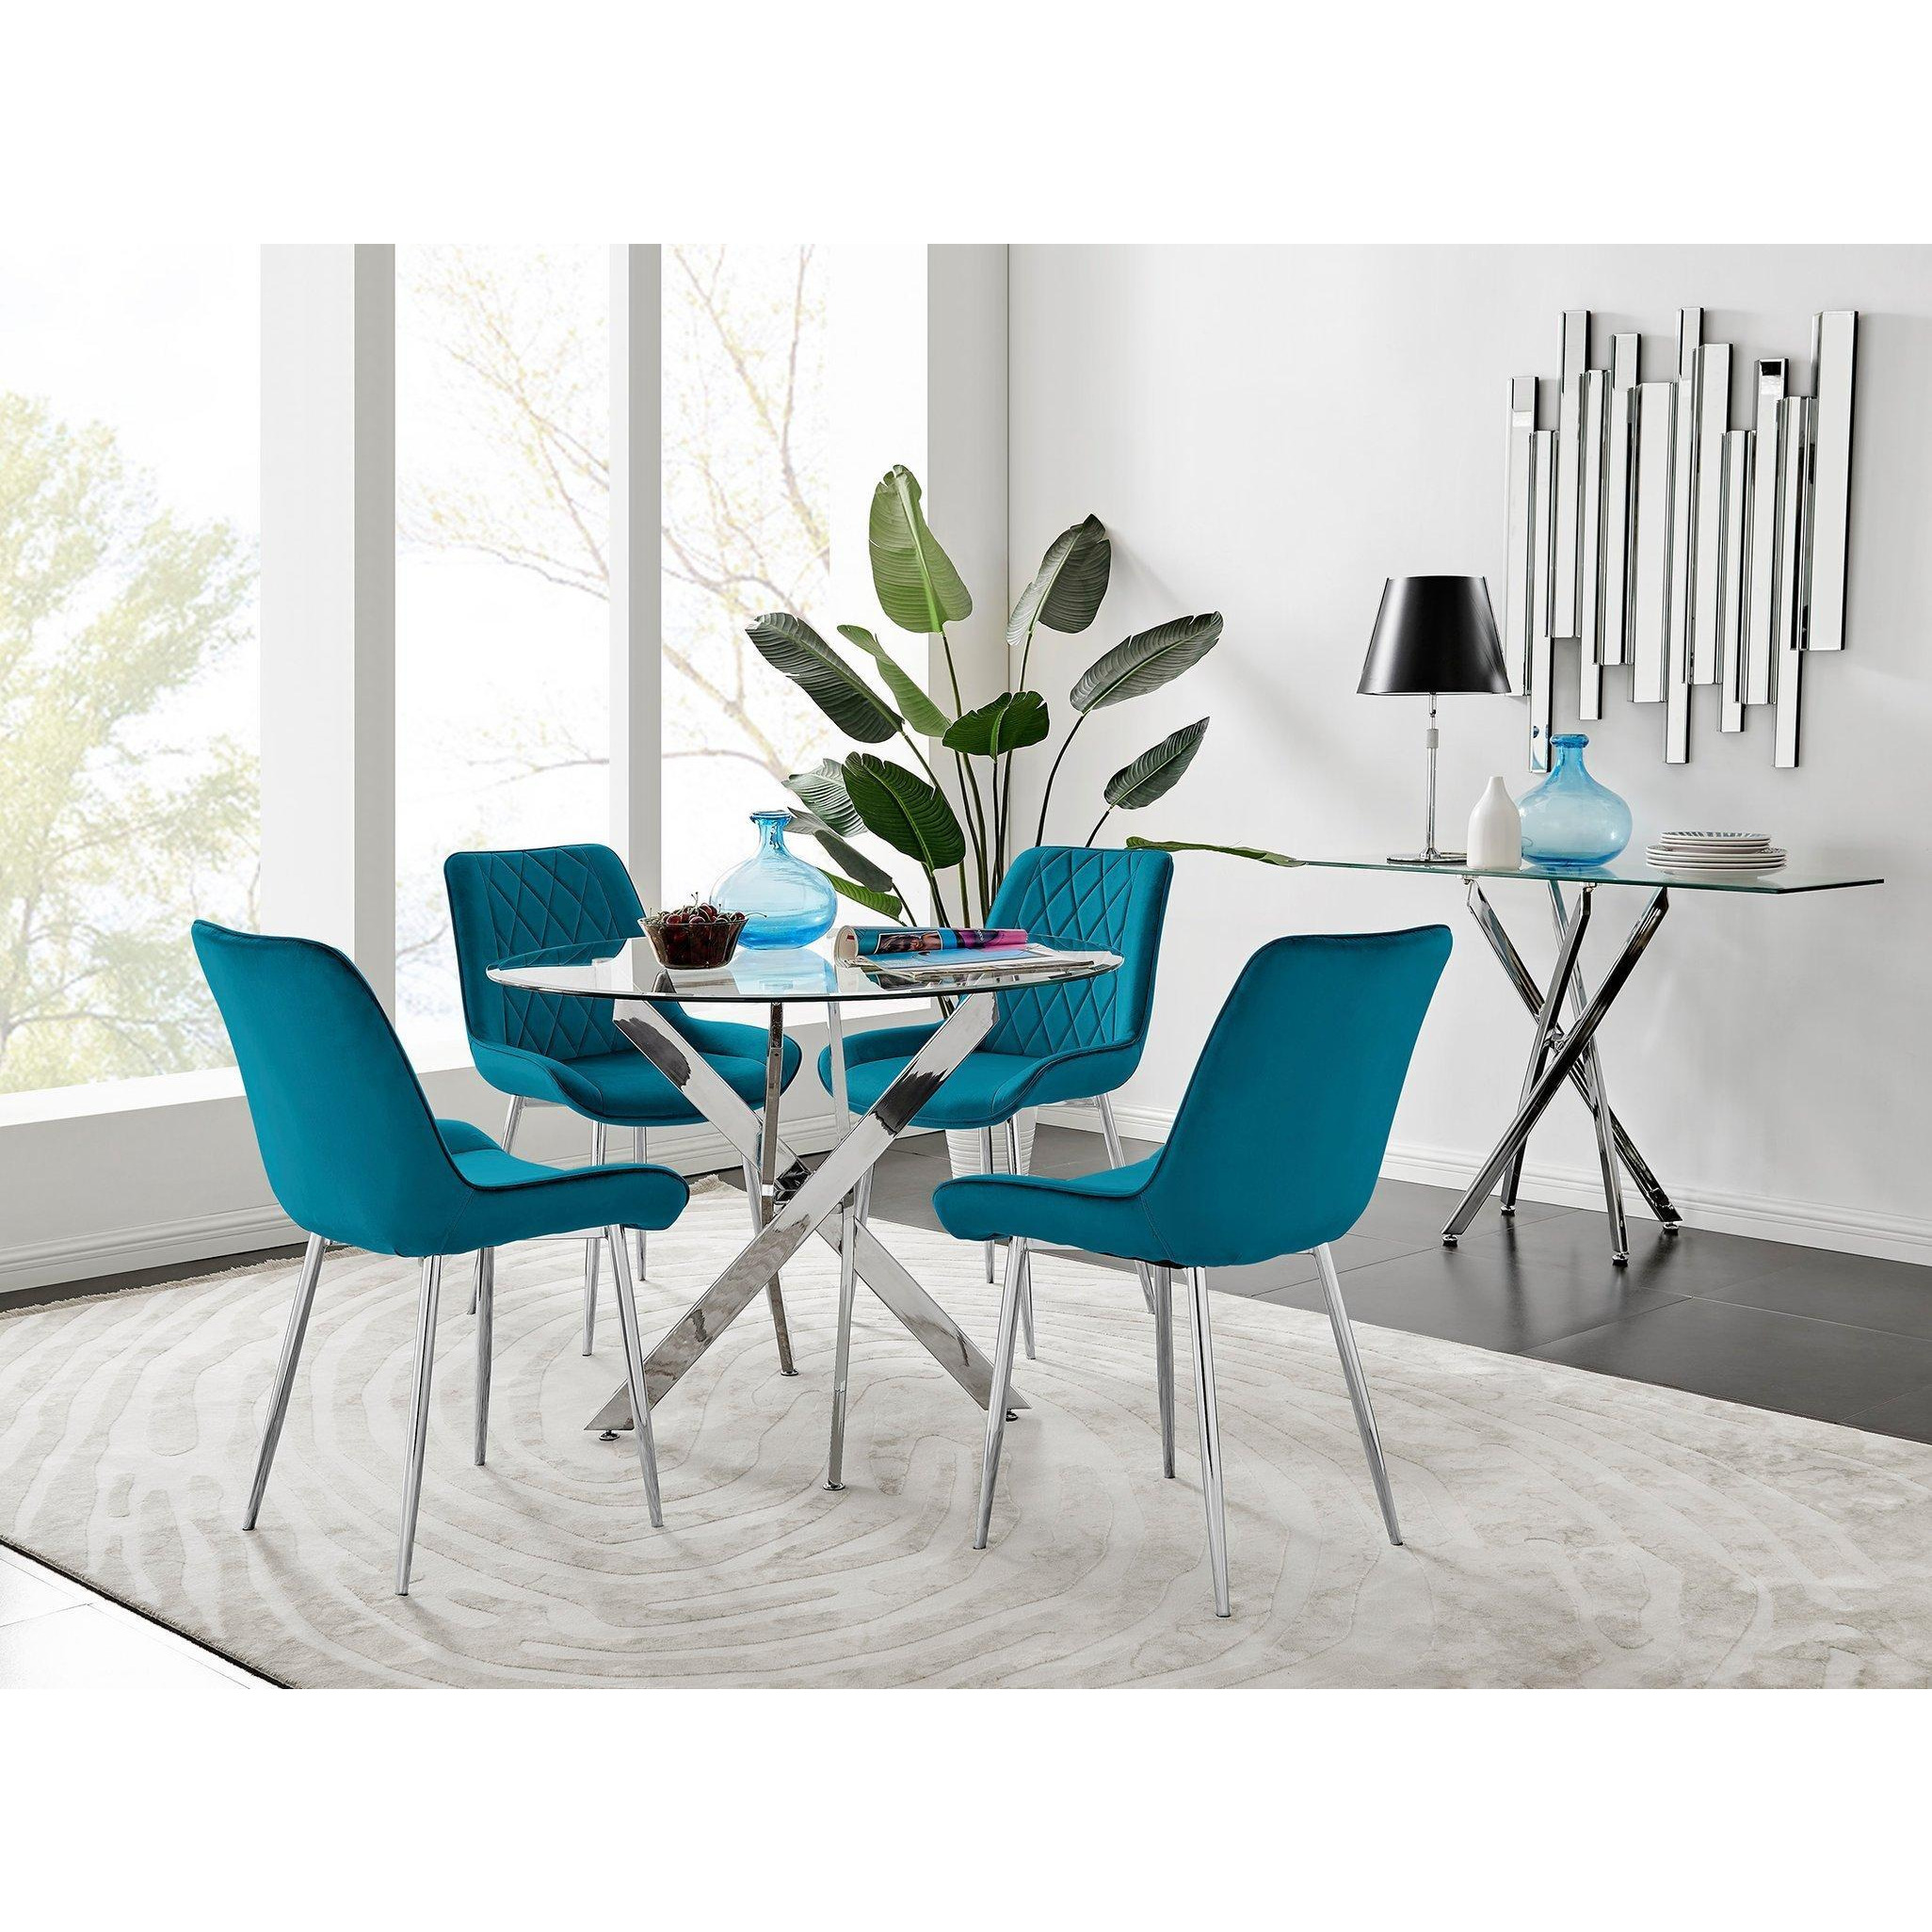 Novara Clear Tempered Glass 100cm Round Dining Table with Chrome Starburst Legs & 4 Pesaro Velvet Silver Leg Chairs - image 1